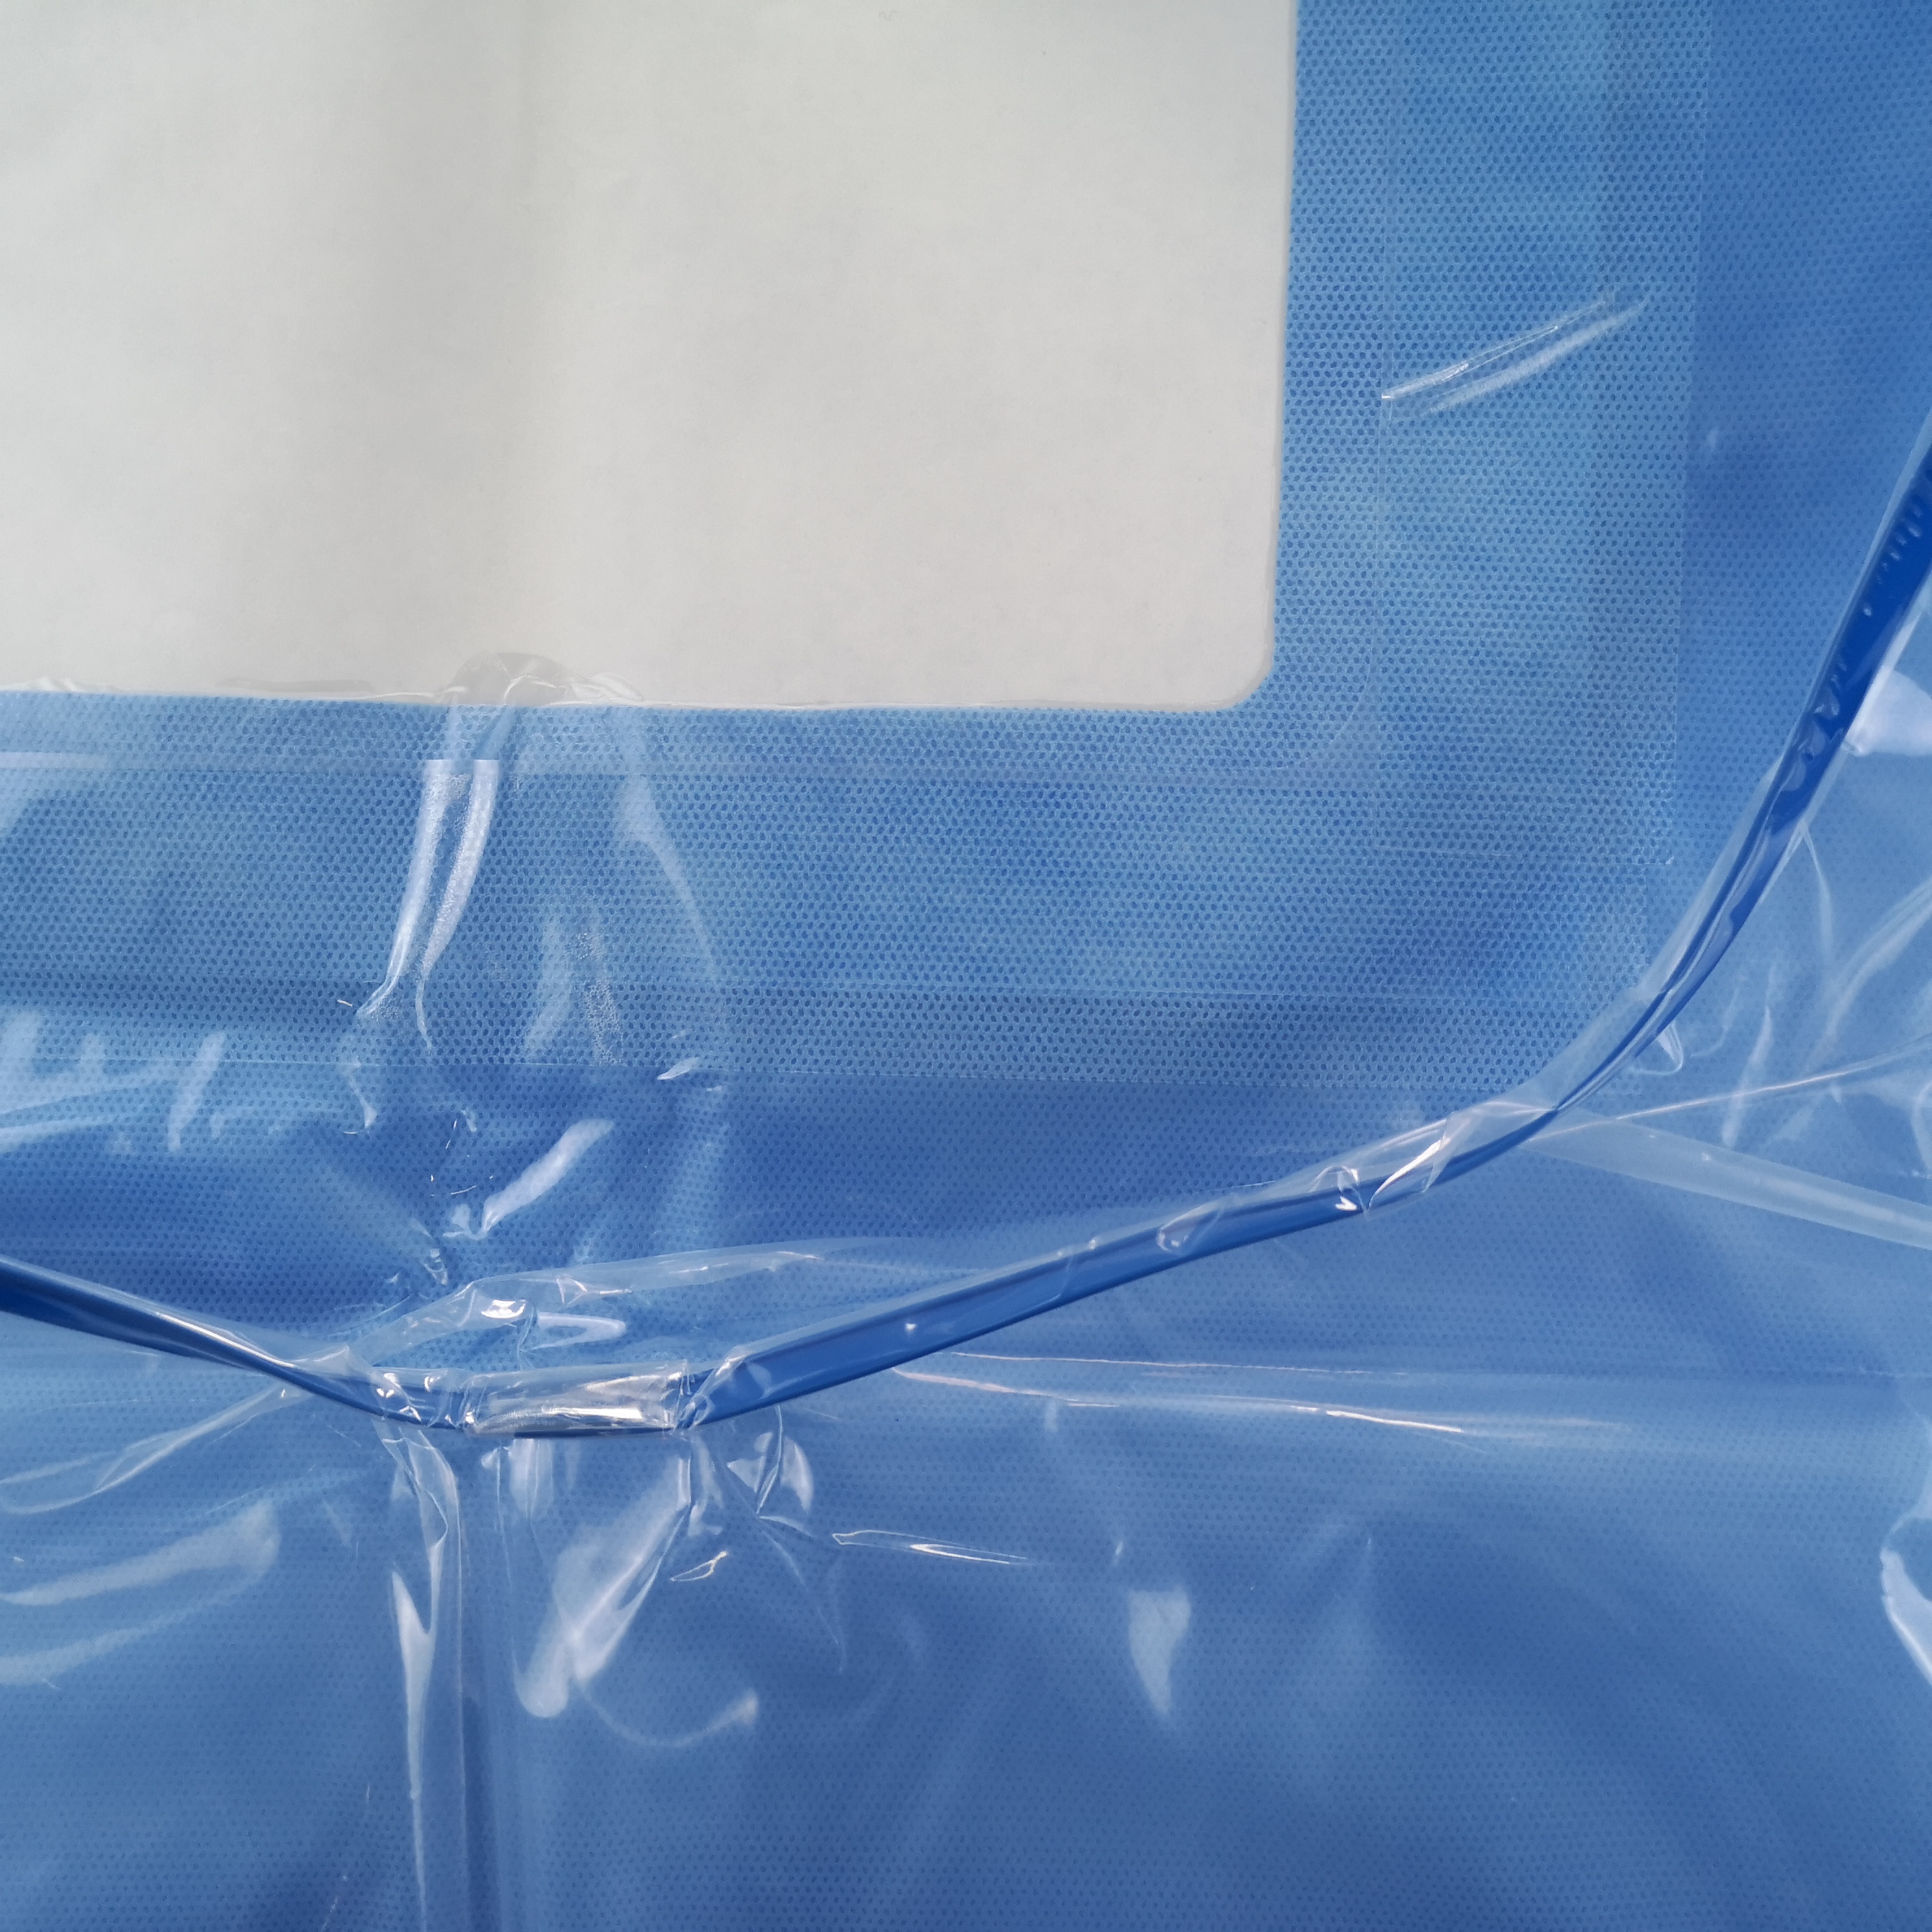 OEM Best Selling Medical Cesarean Section Birth Drape Kits Manufacturer With CE ISO13485 Certification